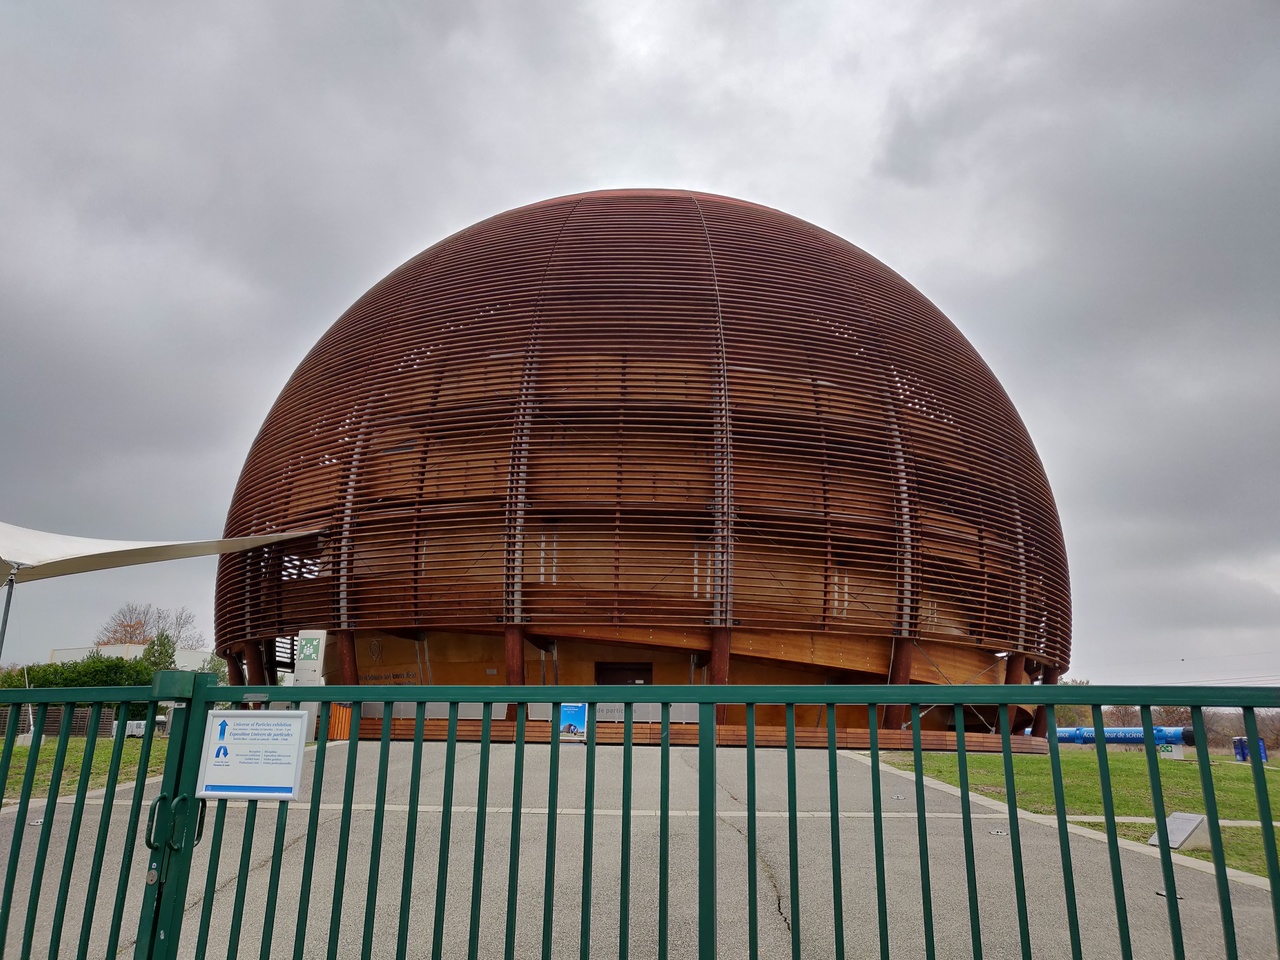 The Globe of Science and Innovation - CERN